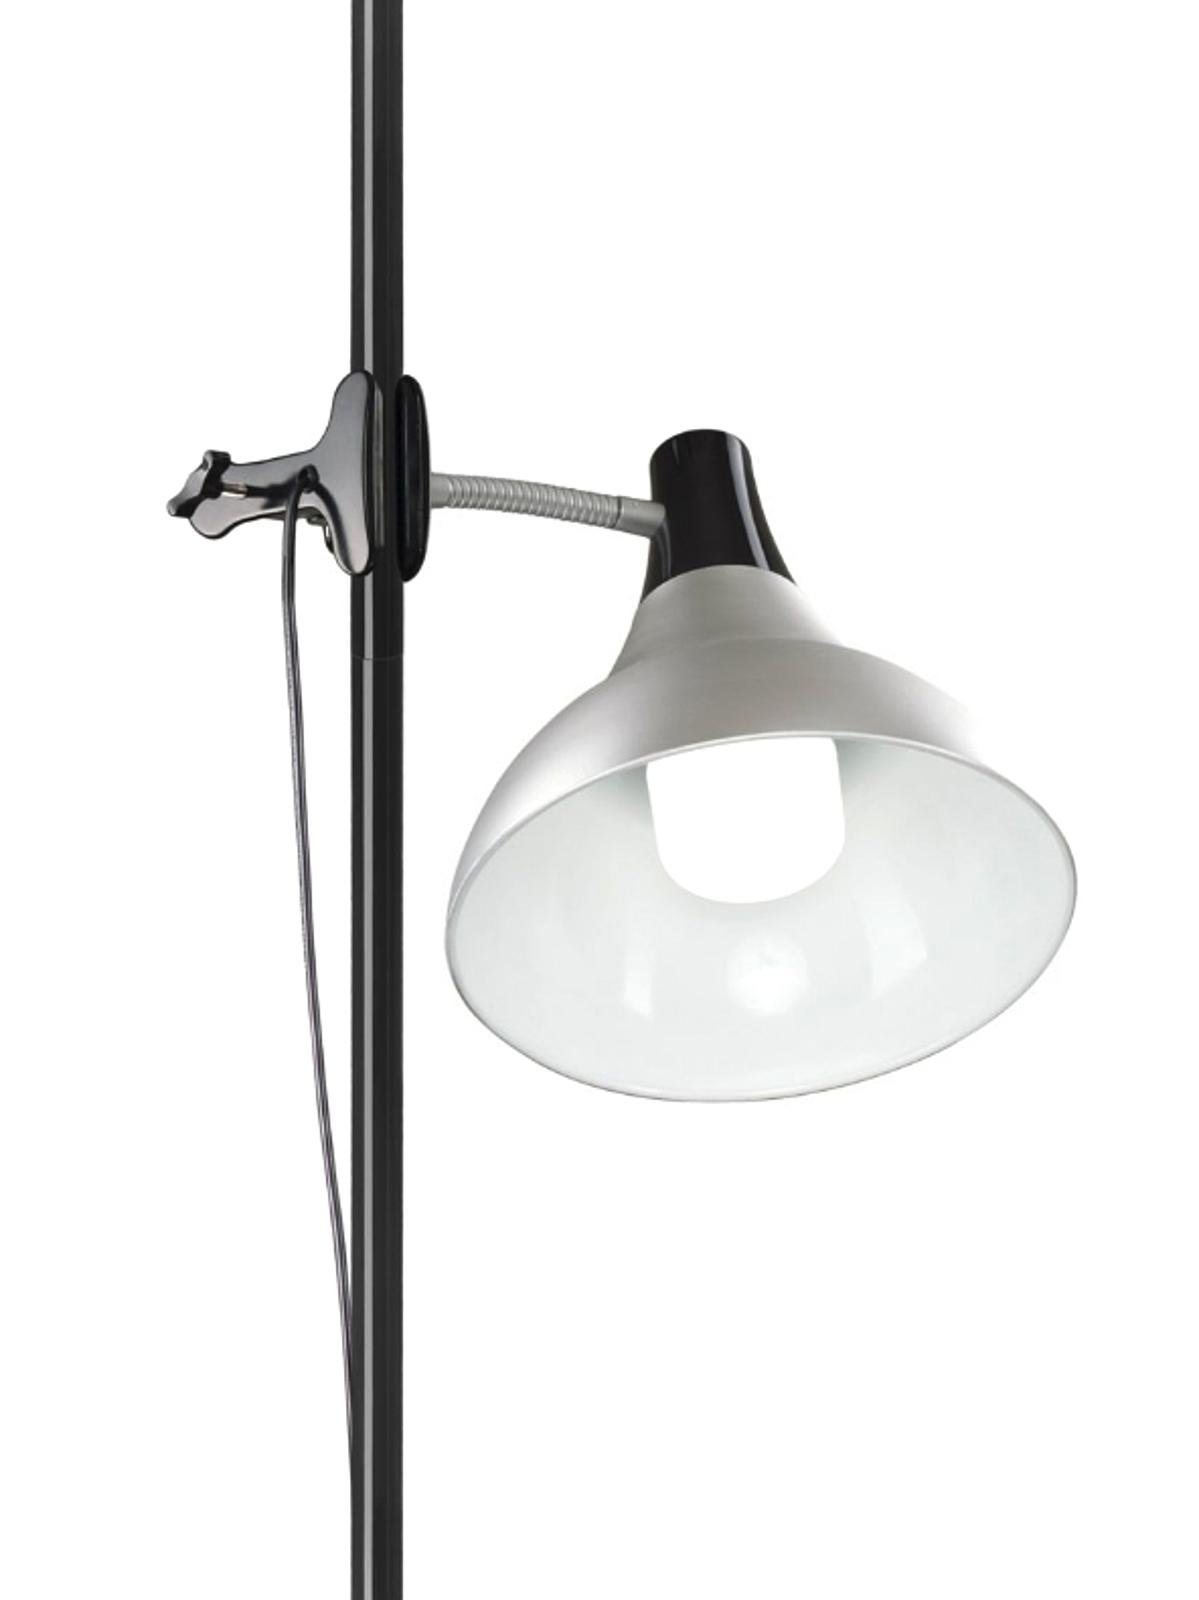 Daylight Artist Studio Lamp With Stand